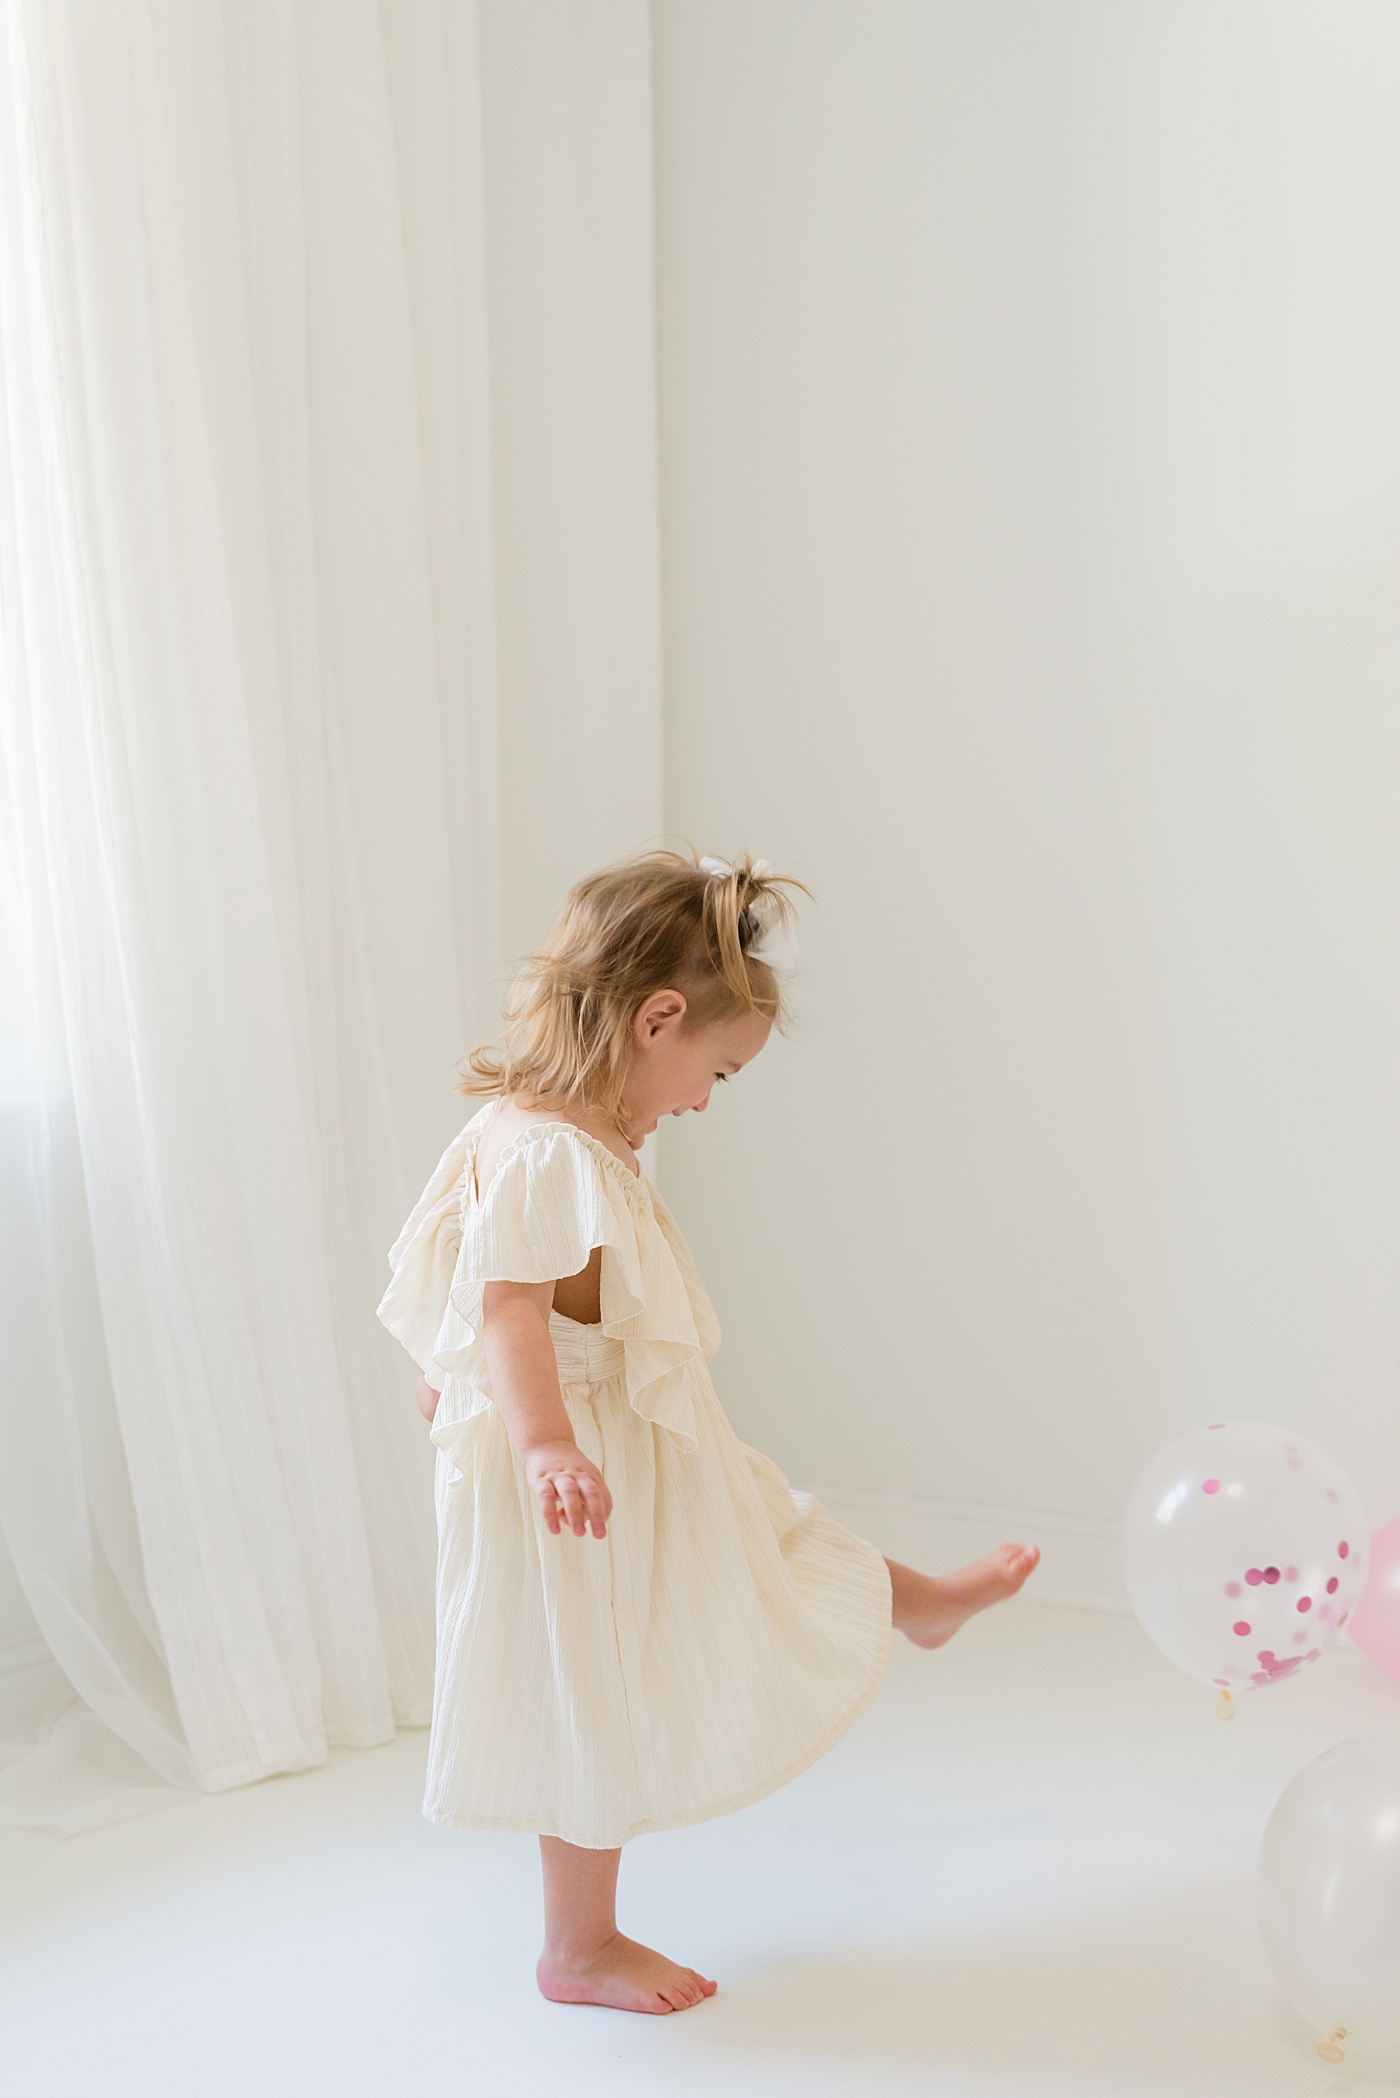 Little girl in white dress kicking balloons in the studio | Photo by Anna Wisjo Photography